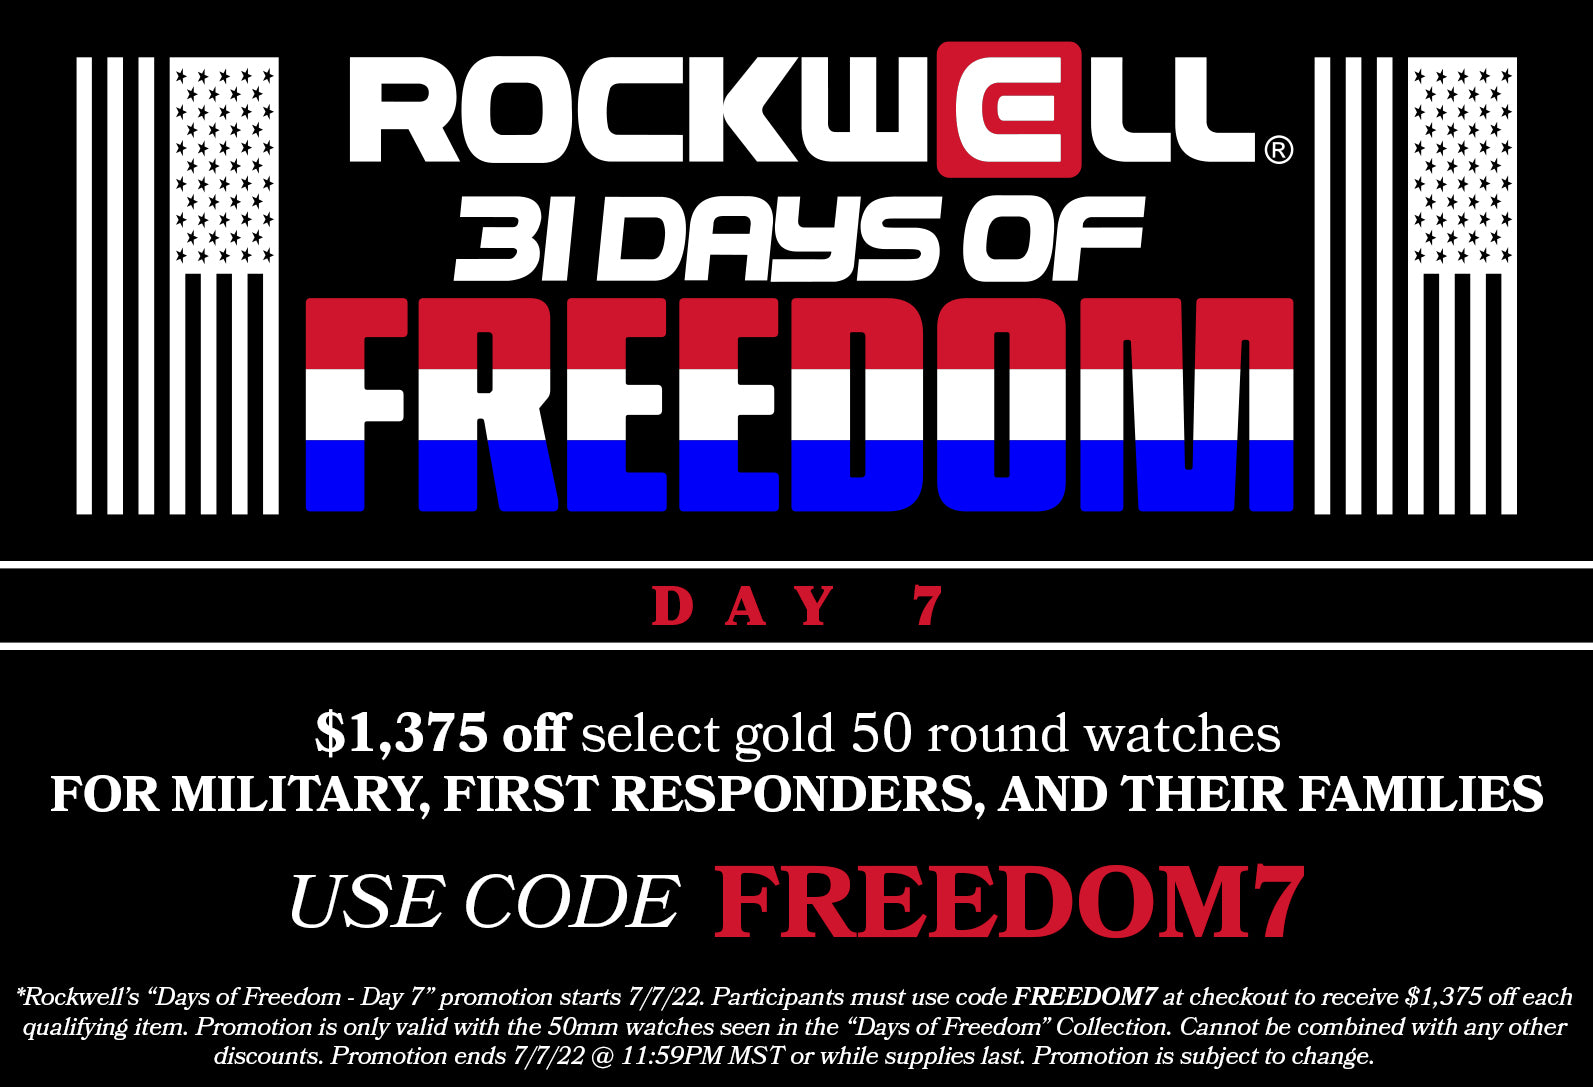 Rockwell 31 Days of Freedom